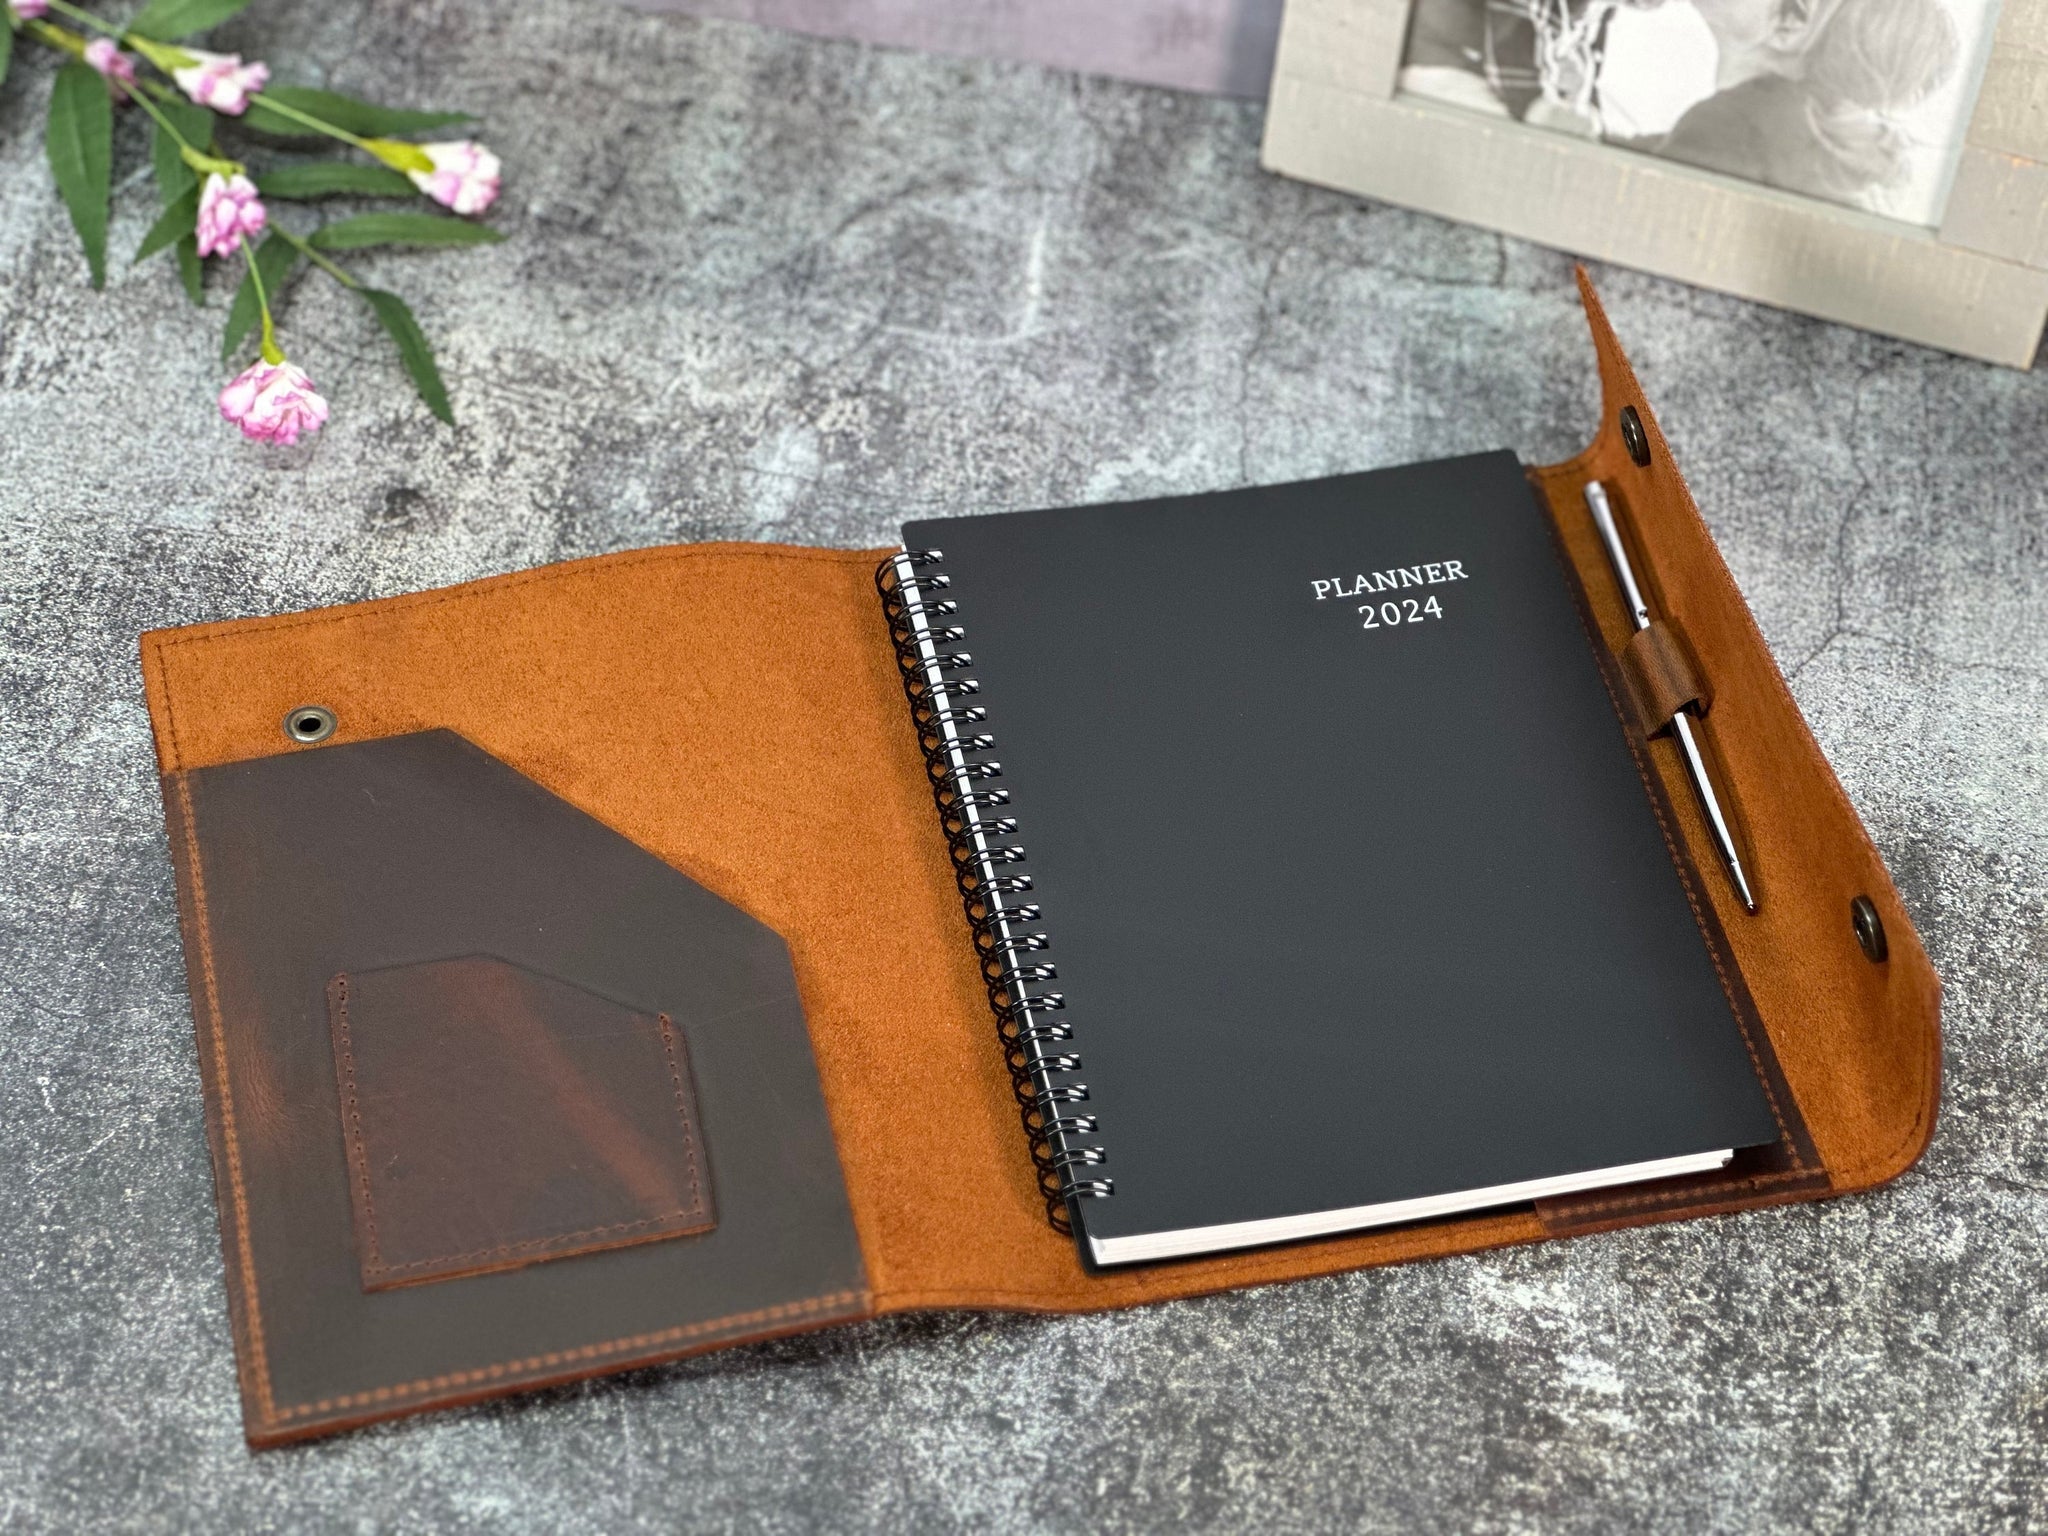 Gift for Her, 2024 Planner, Leather Planner Cover + Free Planner + Rosewood pen, Refillable Personalized Planner, Christmas Gift,